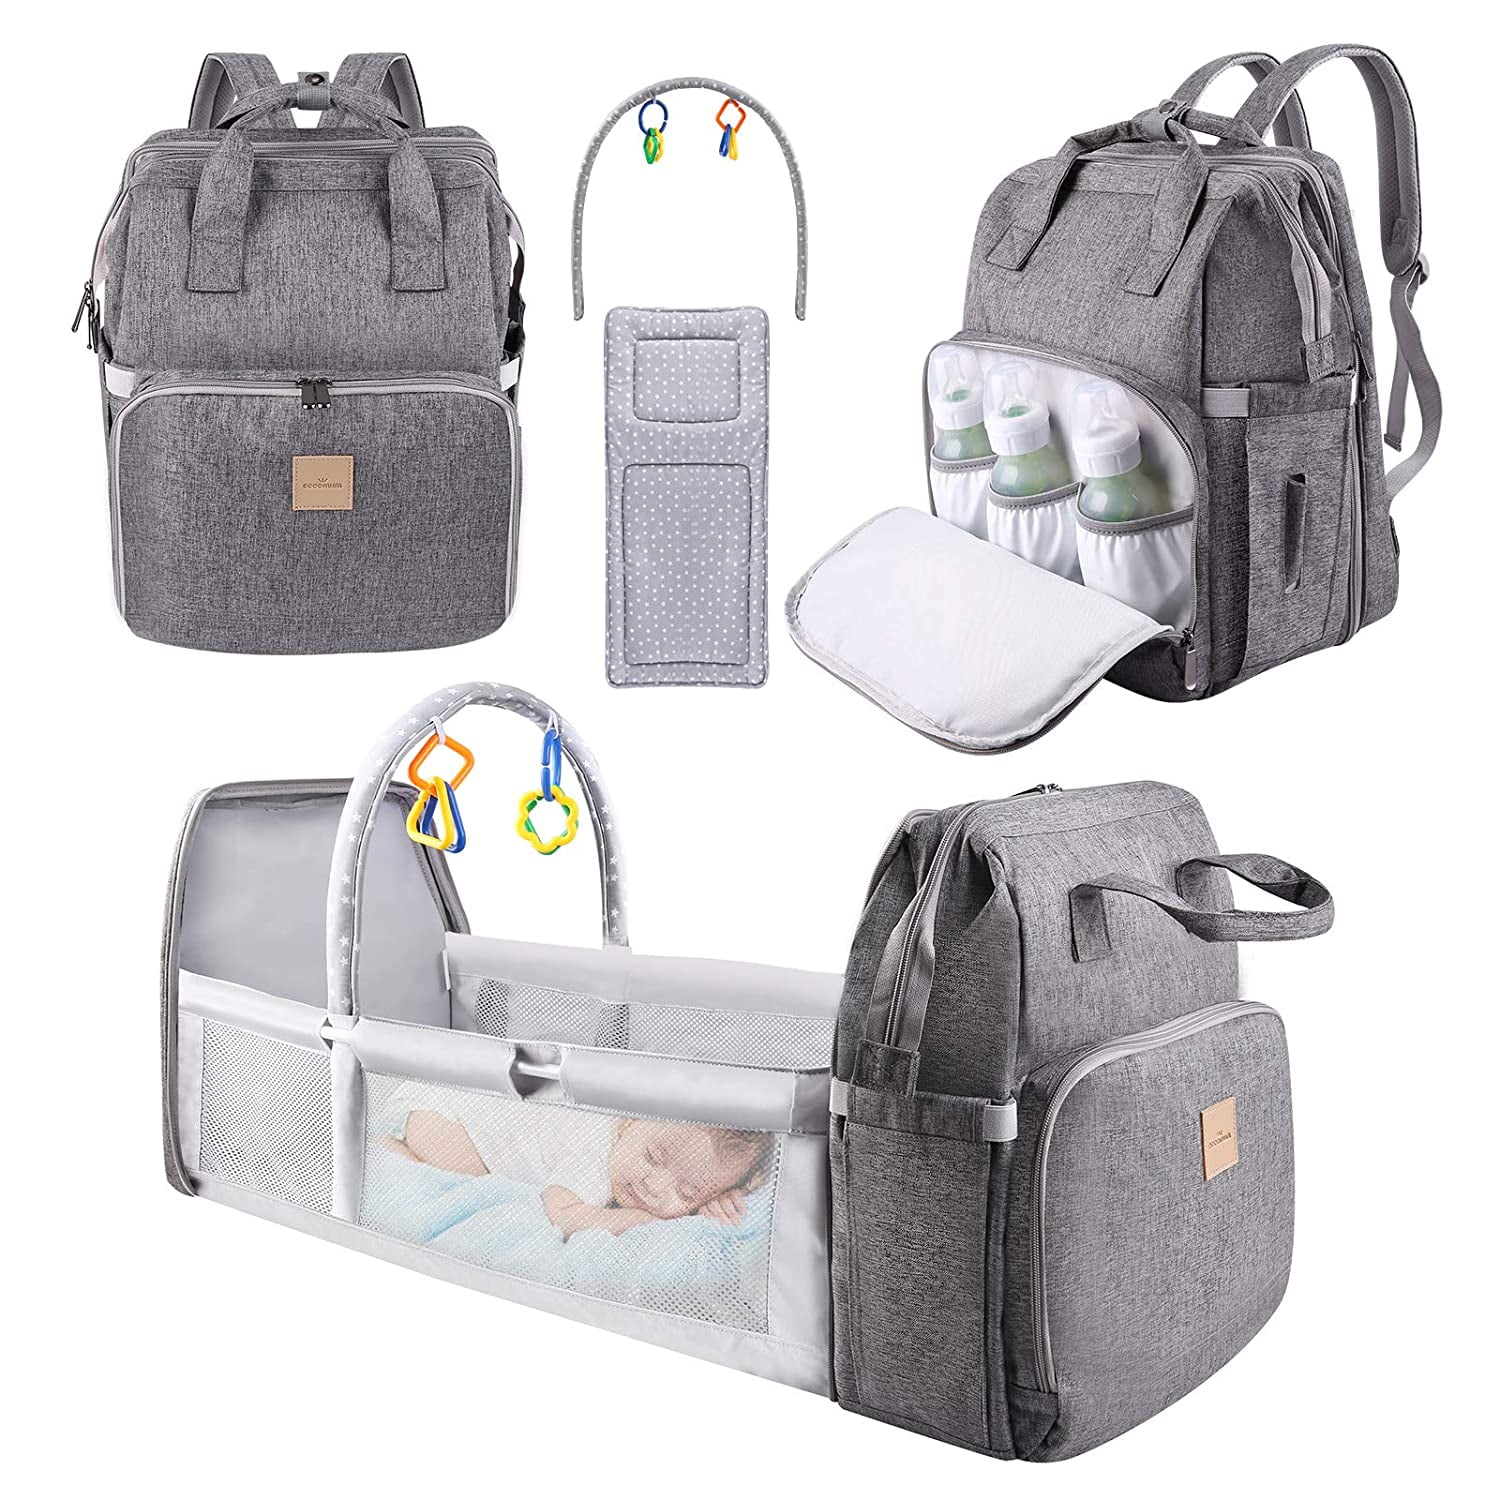 EZGO Land 4 in 1 Diaper Bag Backpack Hospital Maternity Bag Multi-Function & Waterproof Large Capacity Arrow Pattern Baby Nappy Changing Bag with 1 Changing Mat & 2 Stroller Clips for Mom & Dad 